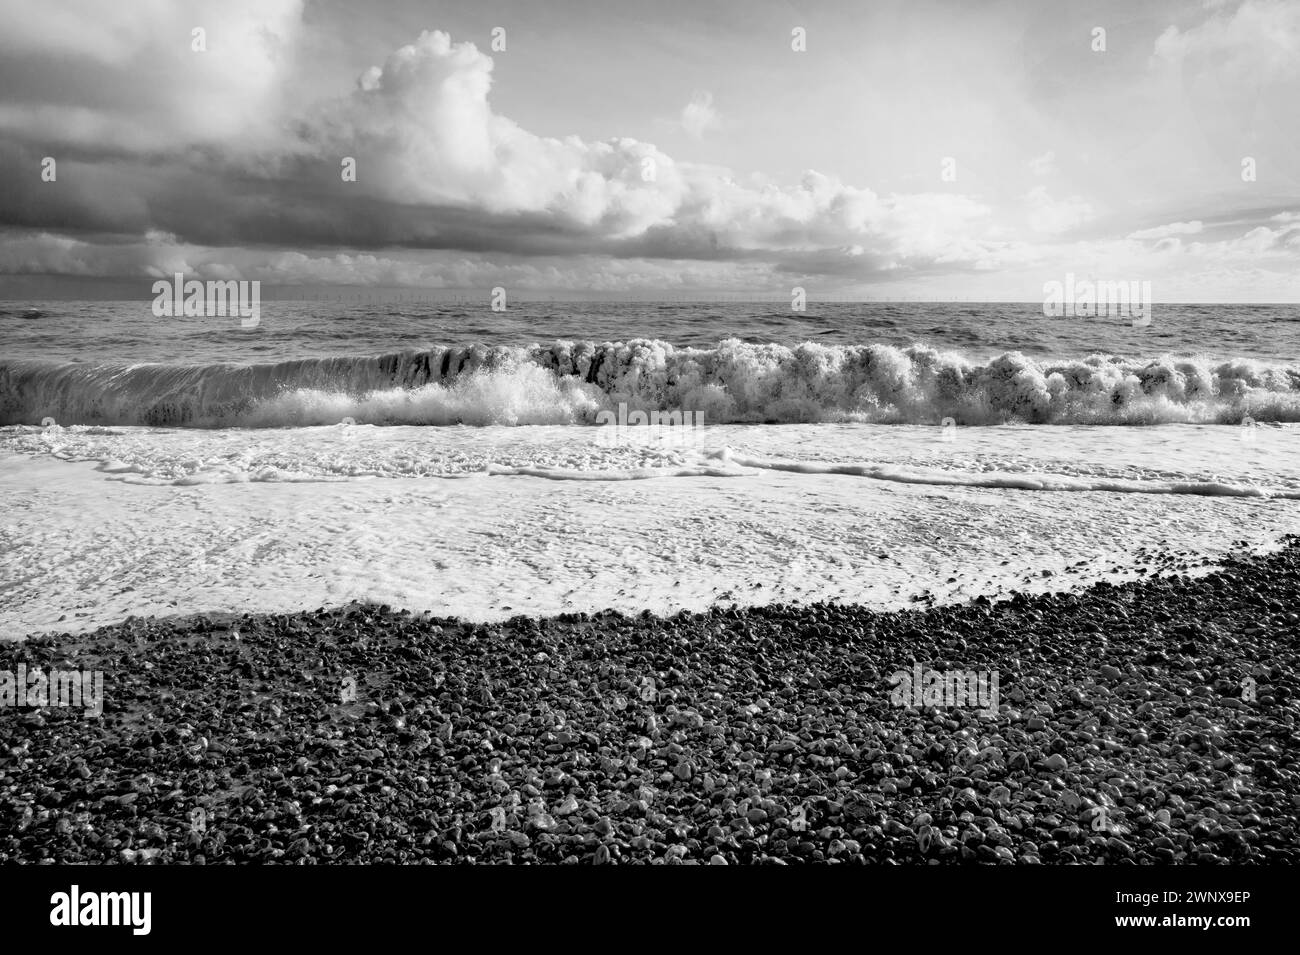 B&w strong sunlight of waves breaking on pebble beach surf, spume & spray, green sea, a blue sky with billowing white clouds South Coast England Stock Photo